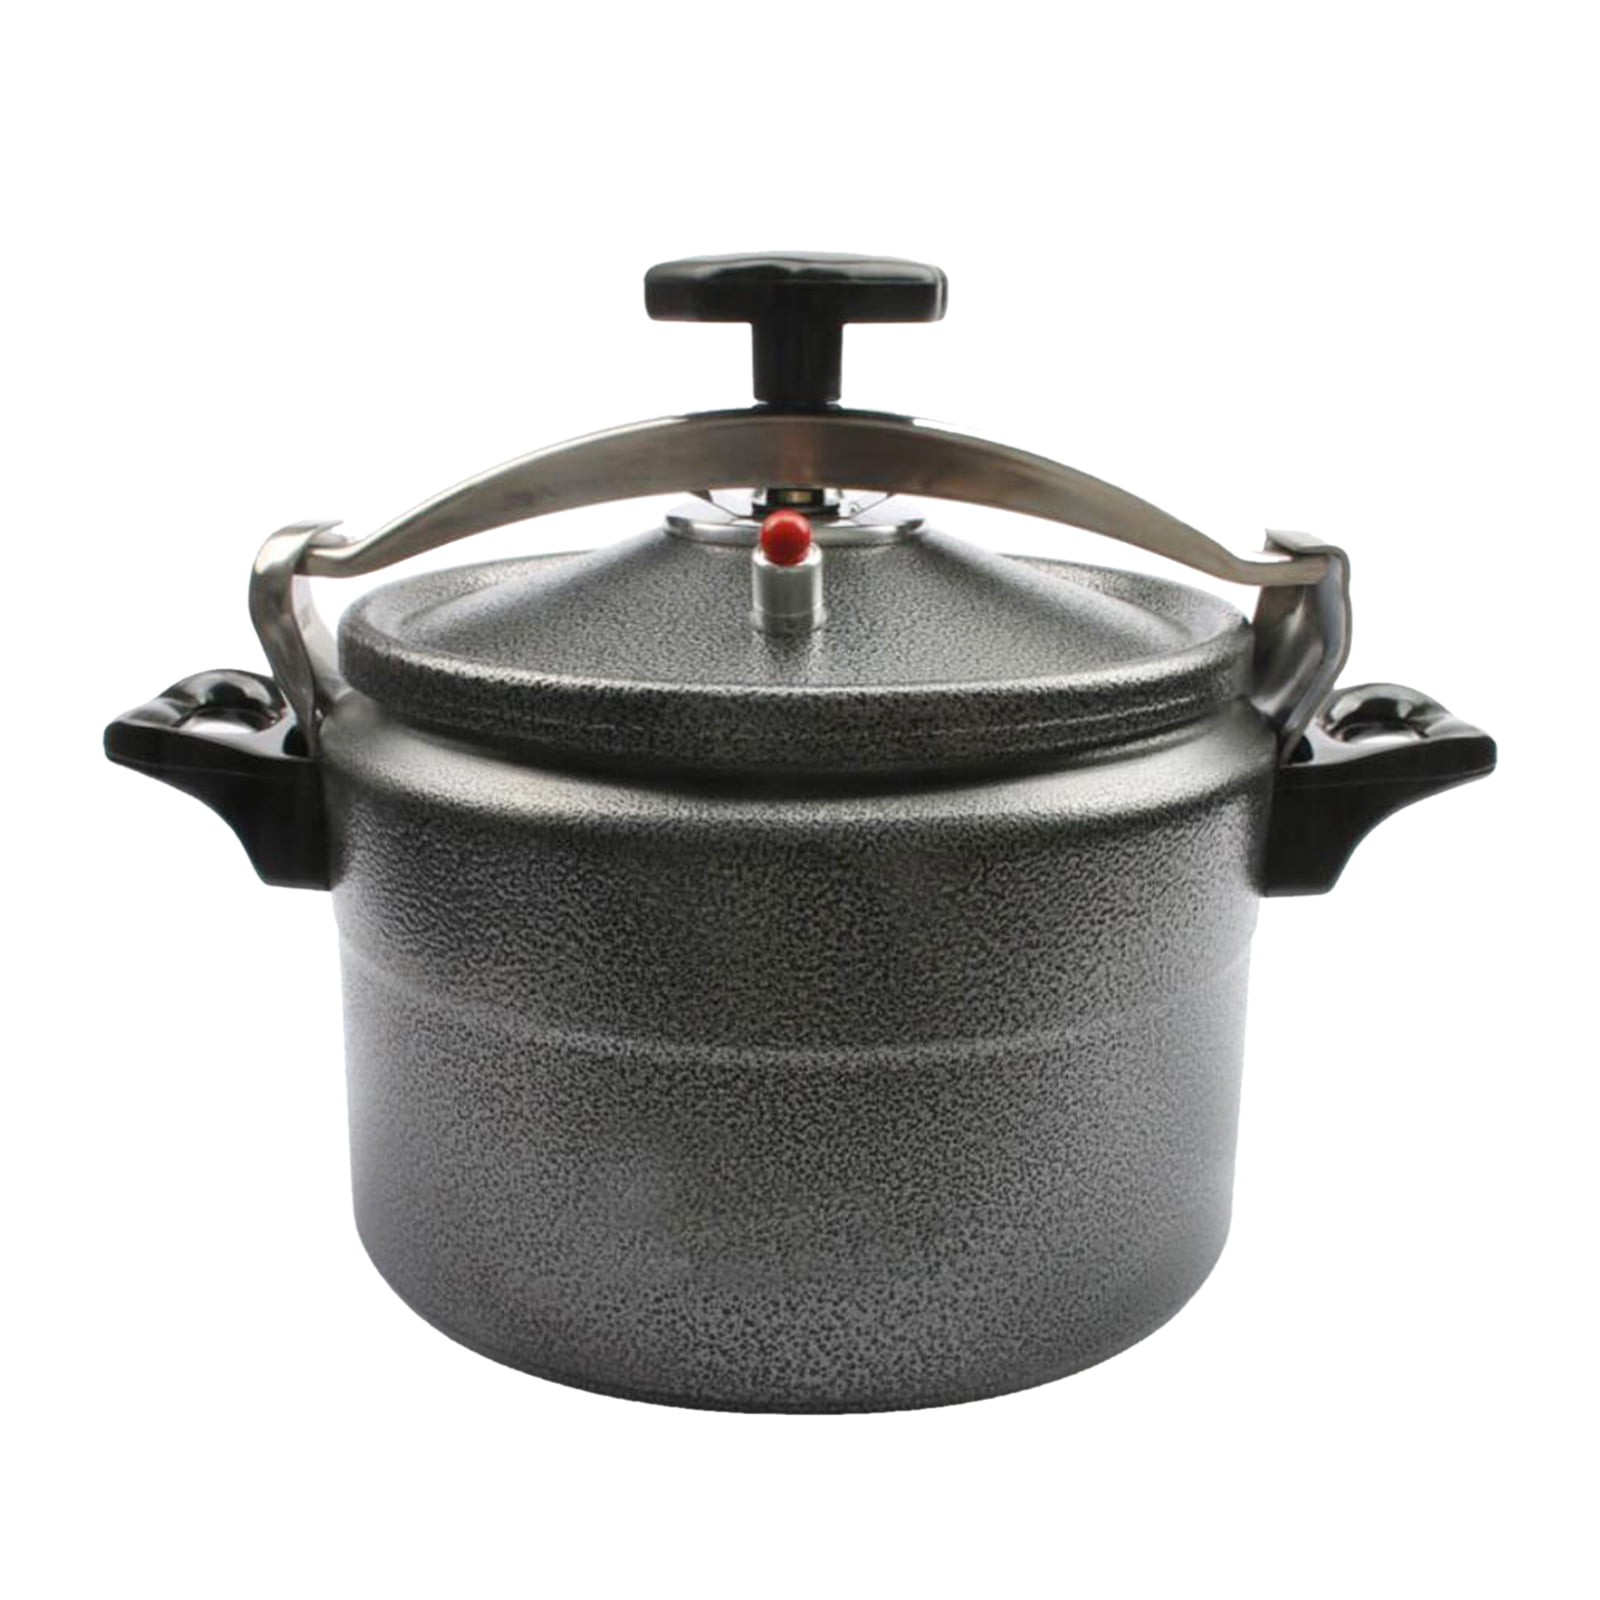 gas, gas Stainless Steel Pressure Cooker Cooking Pot Anti-scald Handle 4L/5L Stewed Meat For Home Use 20cm